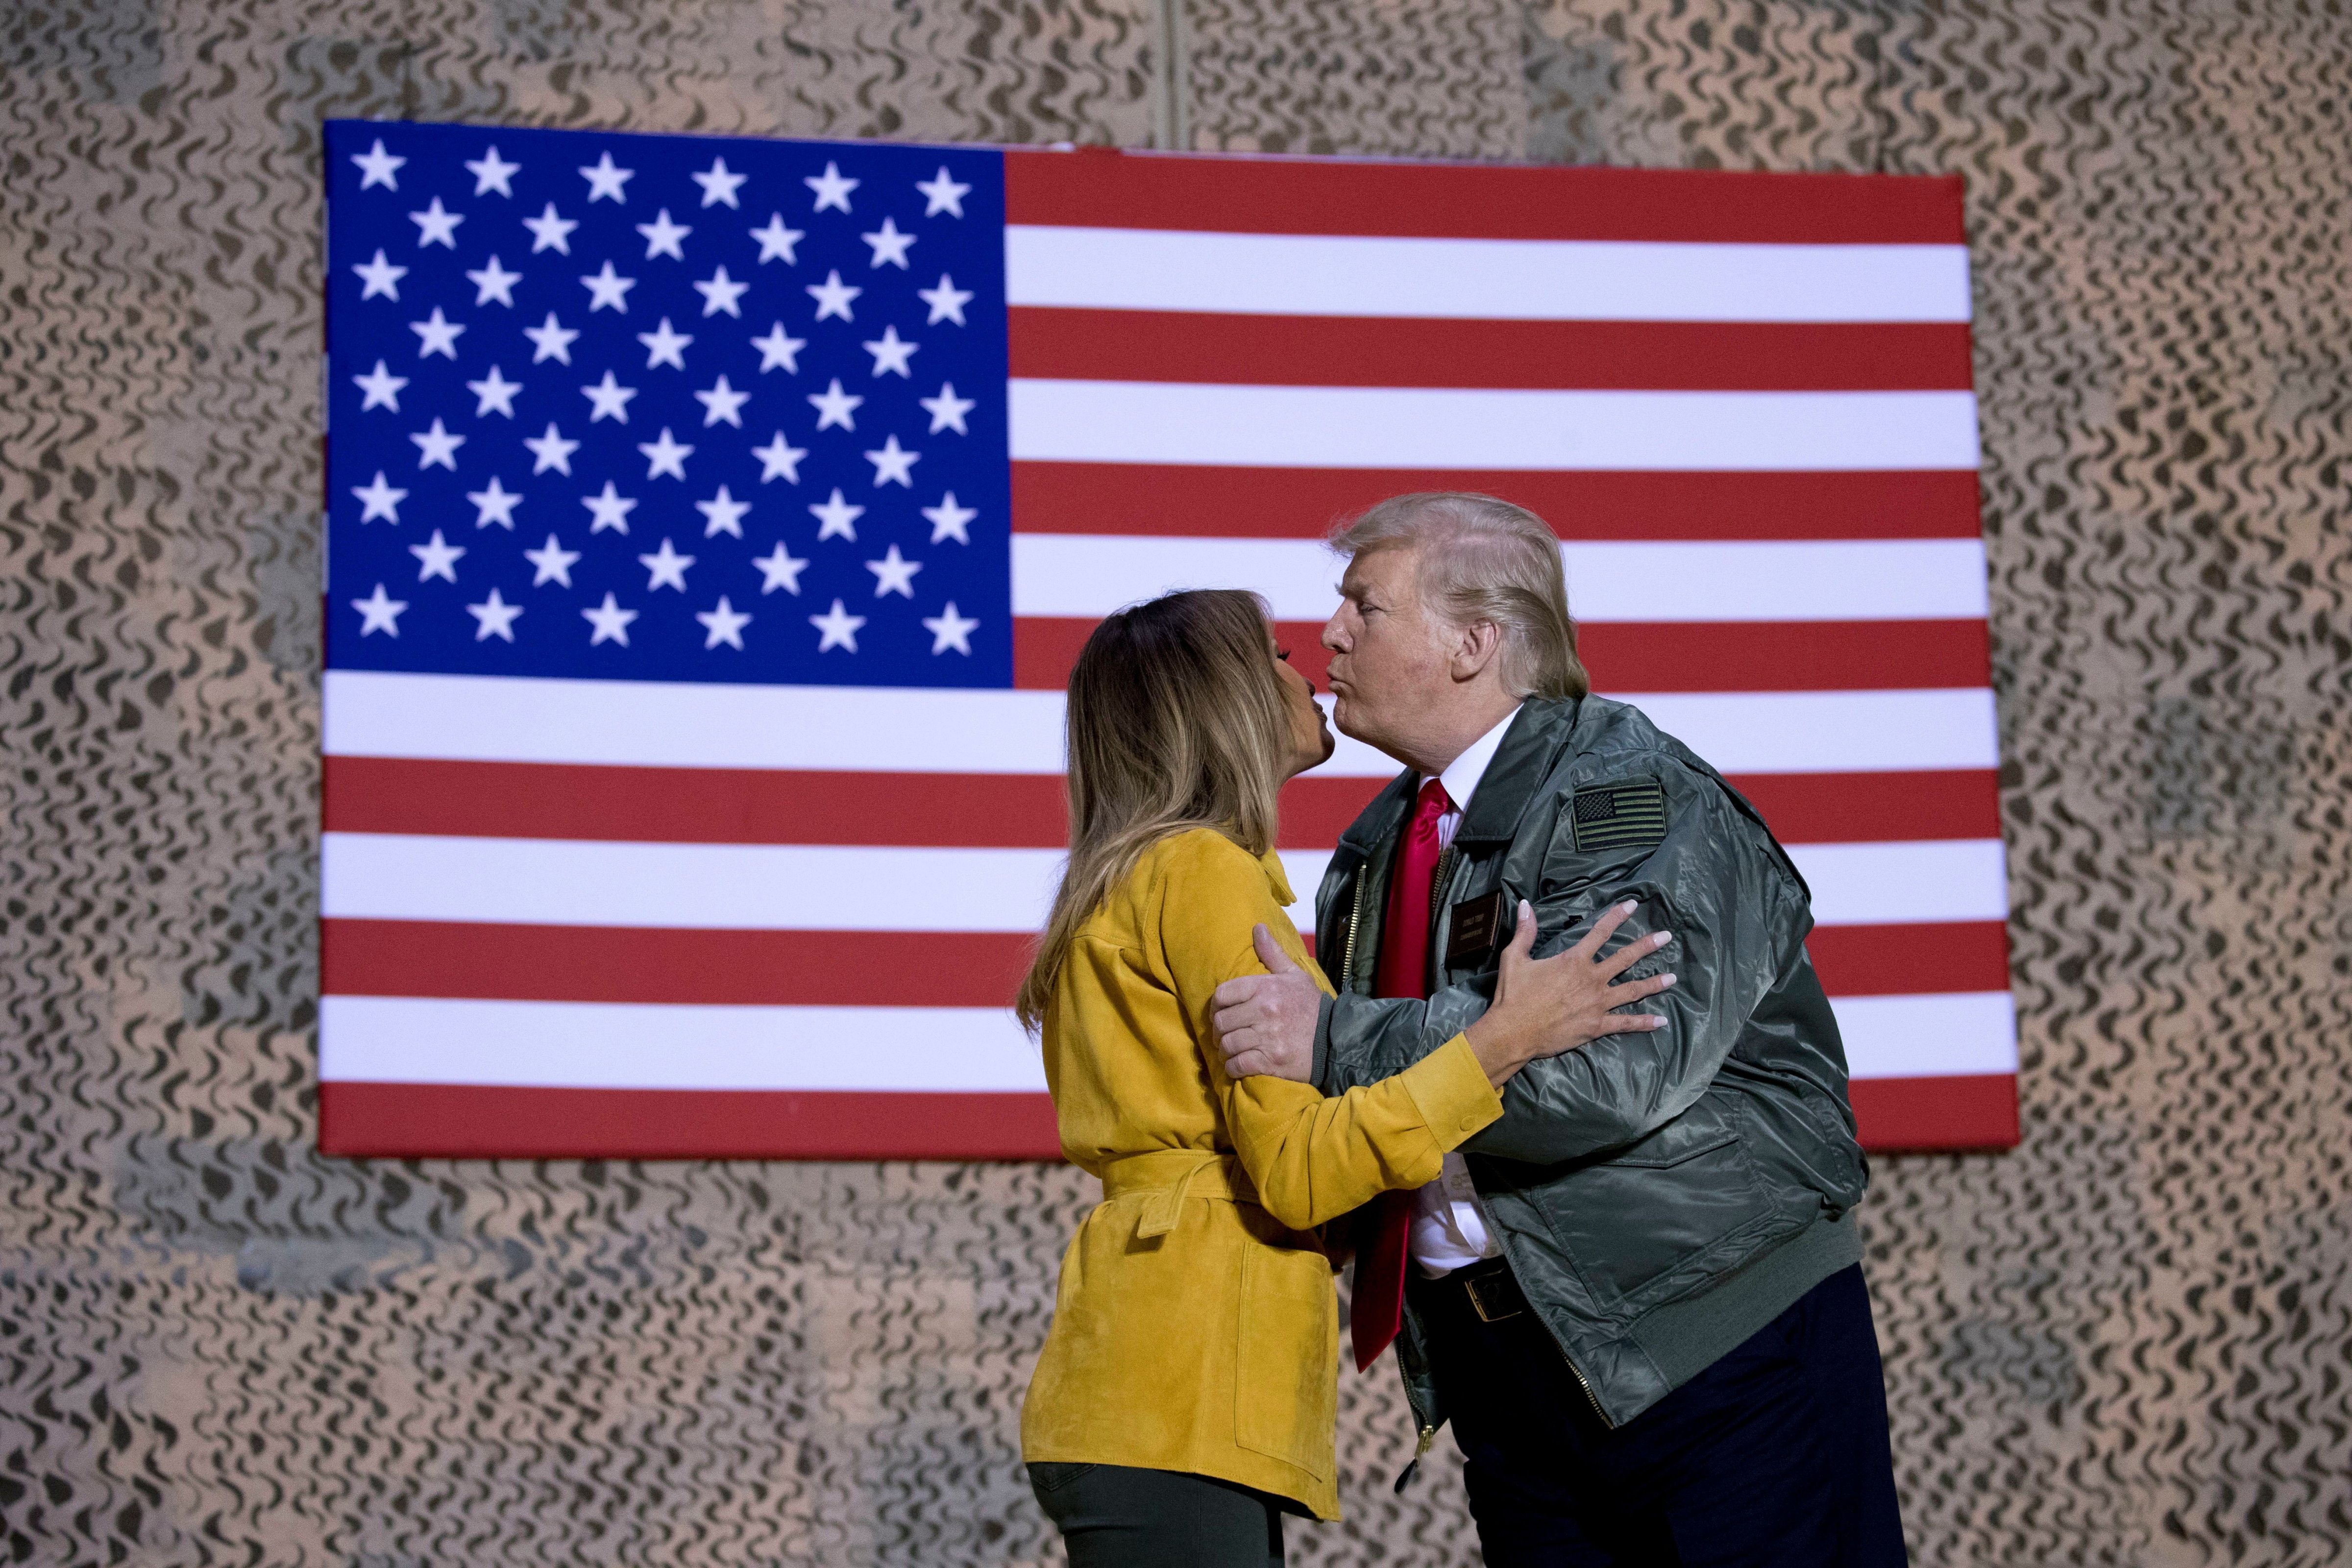 President Donald Trump kisses first lady Melania Trump during a hanger rally at Al Asad Air Base, Iraq, on Dec. 26, 2018. President Donald Trump, who is visiting Iraq, says he has 'no plans at all' to remove US troops from the country. (Andrew Harnik—AP/REX/Shutterstock)